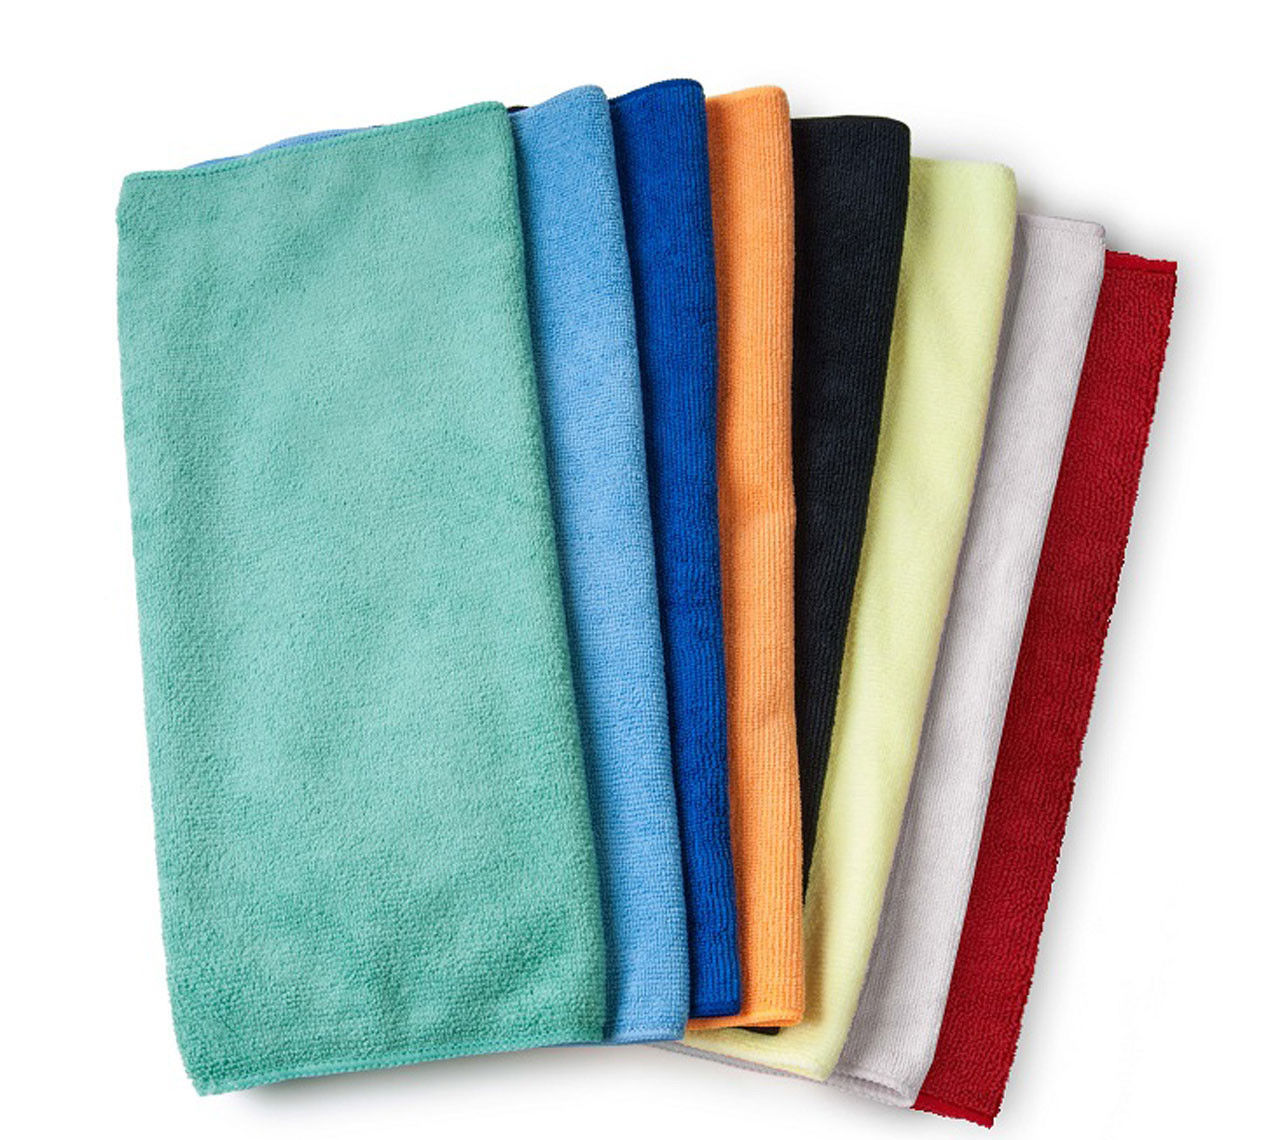 Why are the Microfiber Golf Towels in bulk, 300 gsm, 16 x 16, considered good?